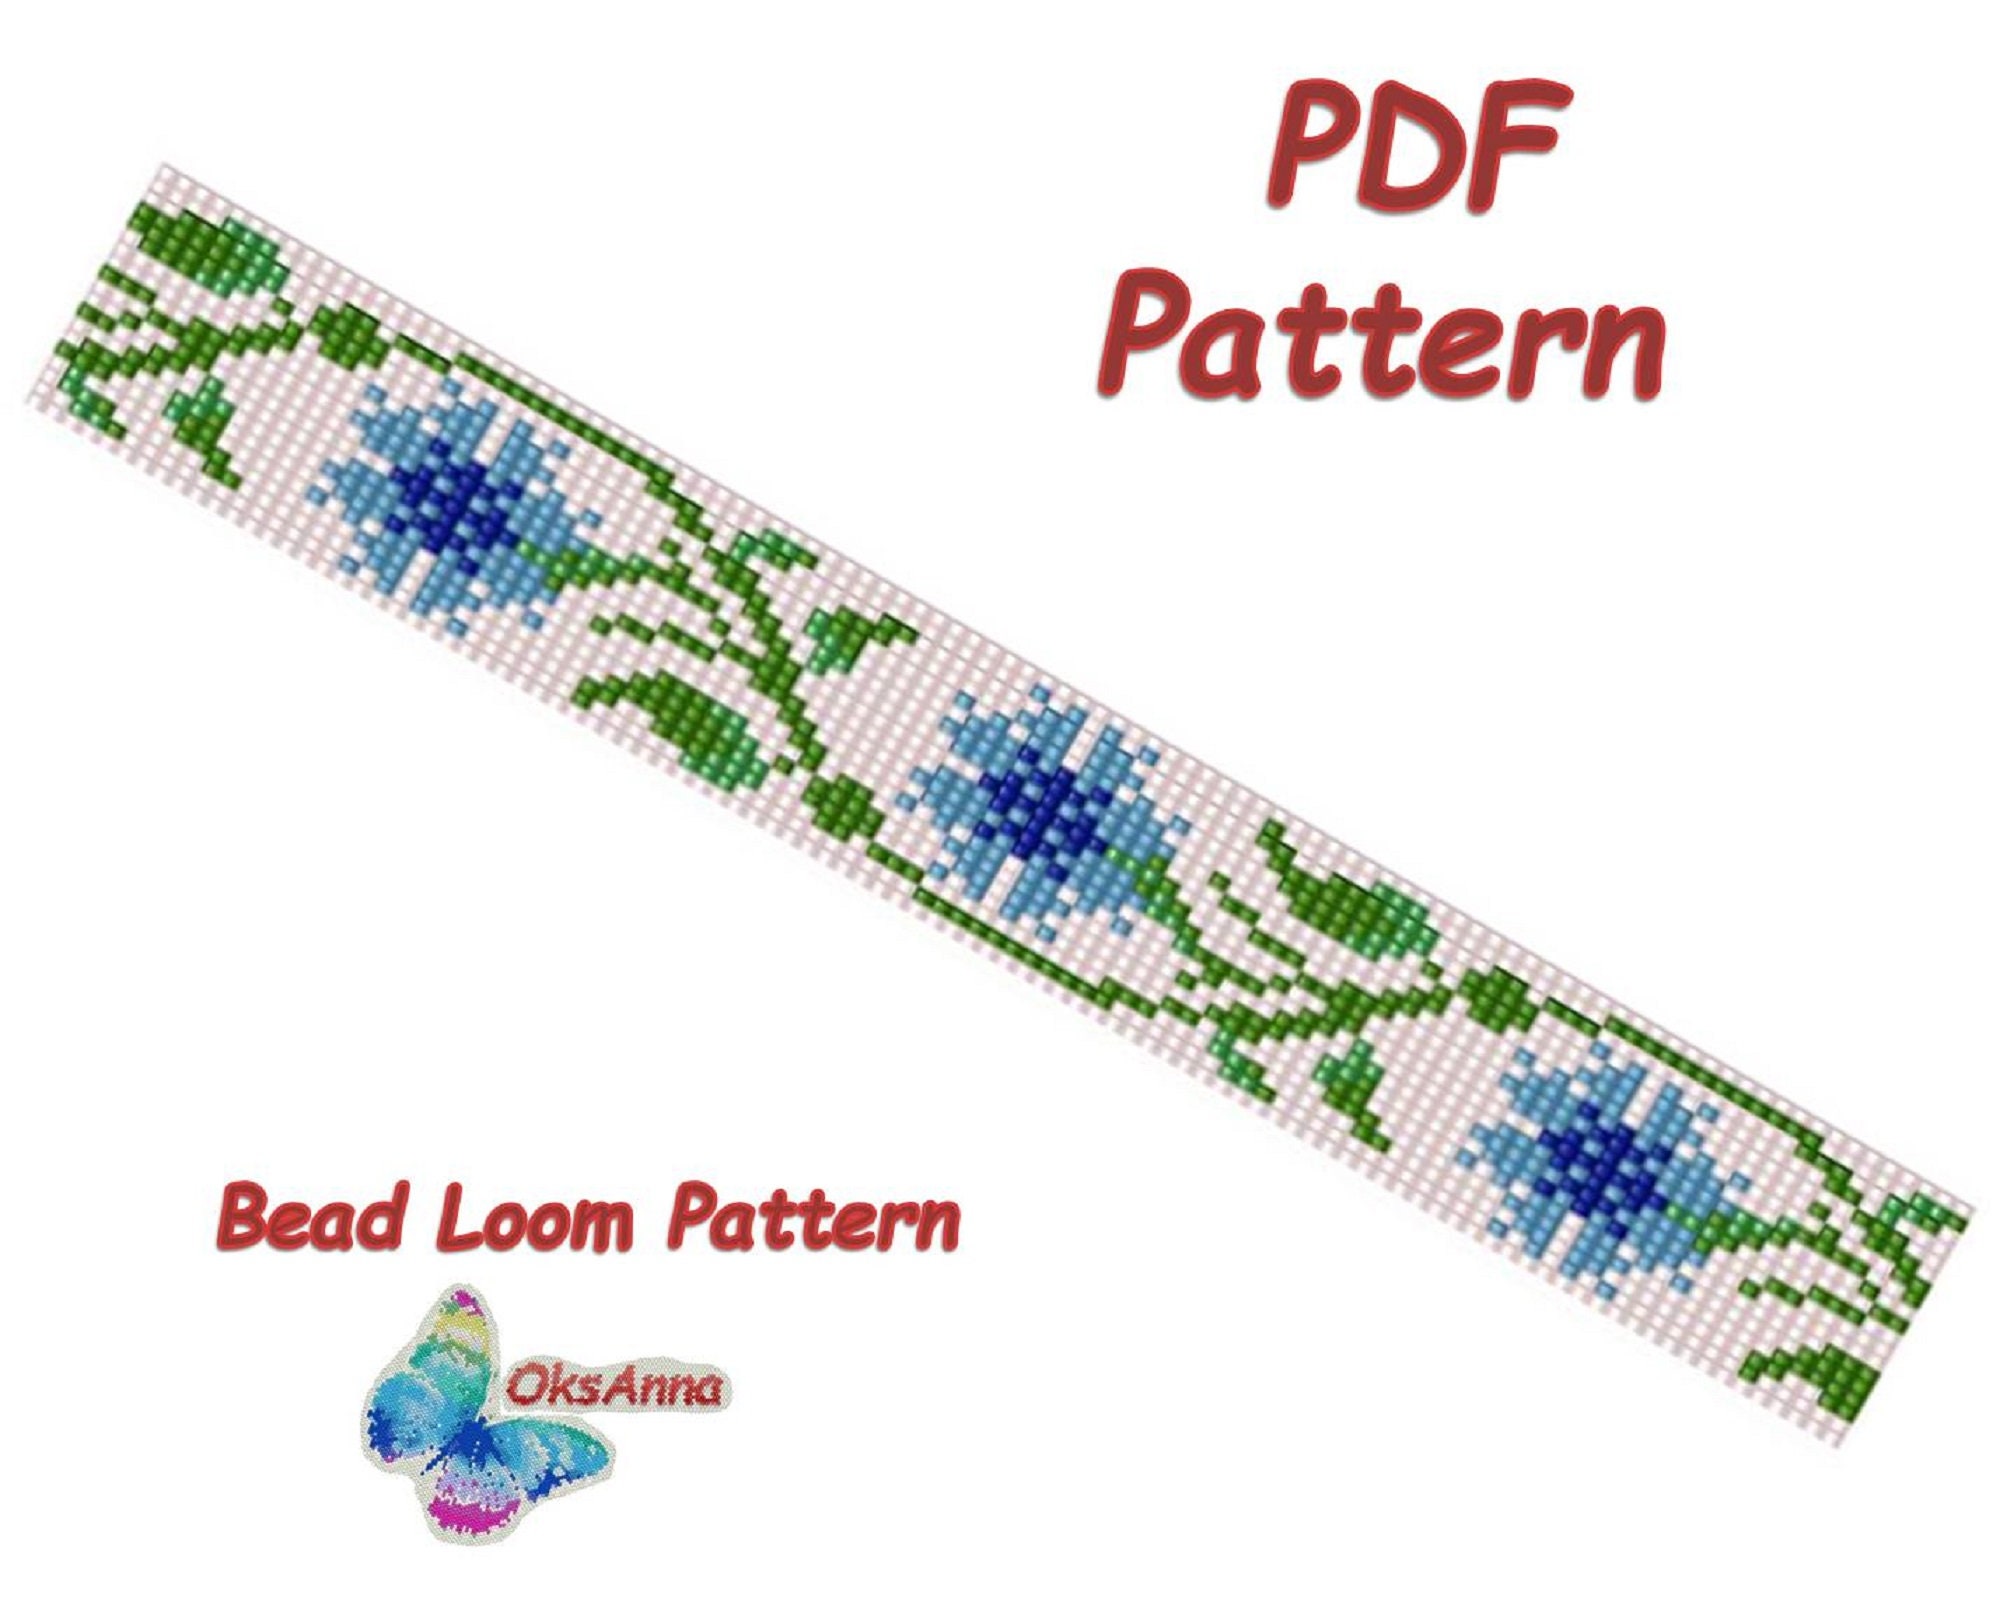 Buy Native Lines Loom Bead Patterns for Bracelets Set of 10 Online in India   Etsy